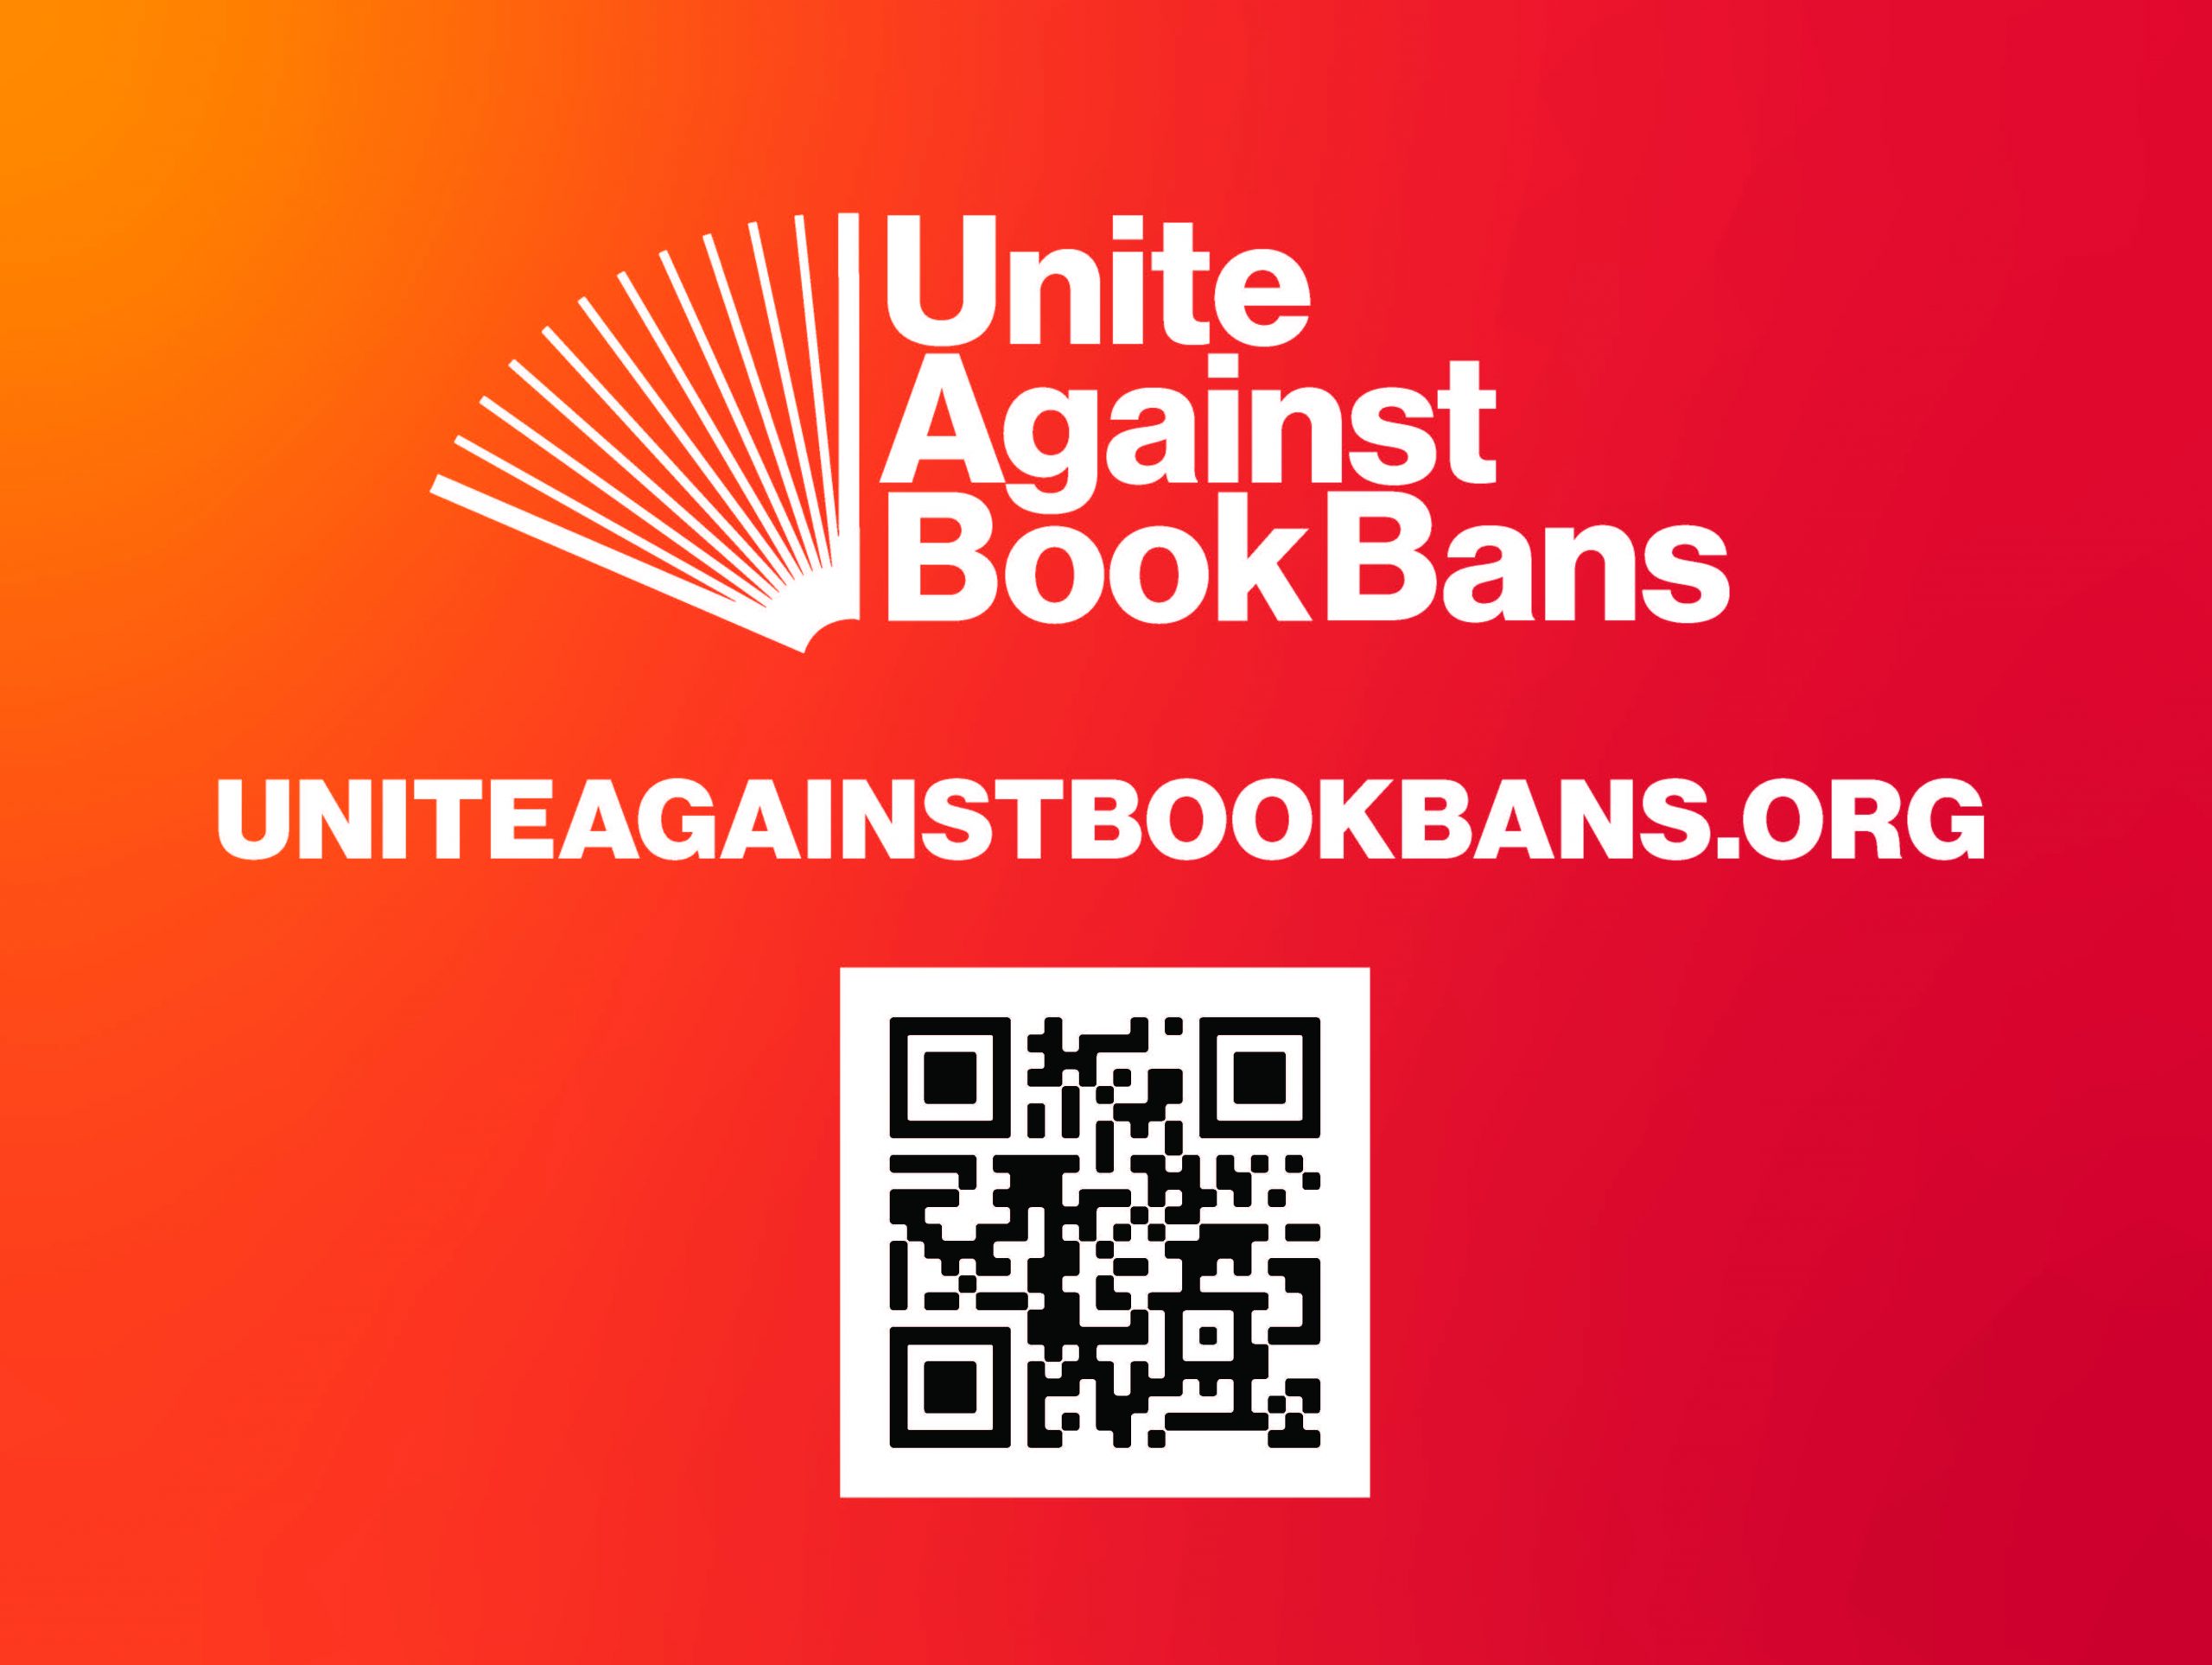 Orange to red gradient image with Unite Against Book Bans logo and URL and QR code